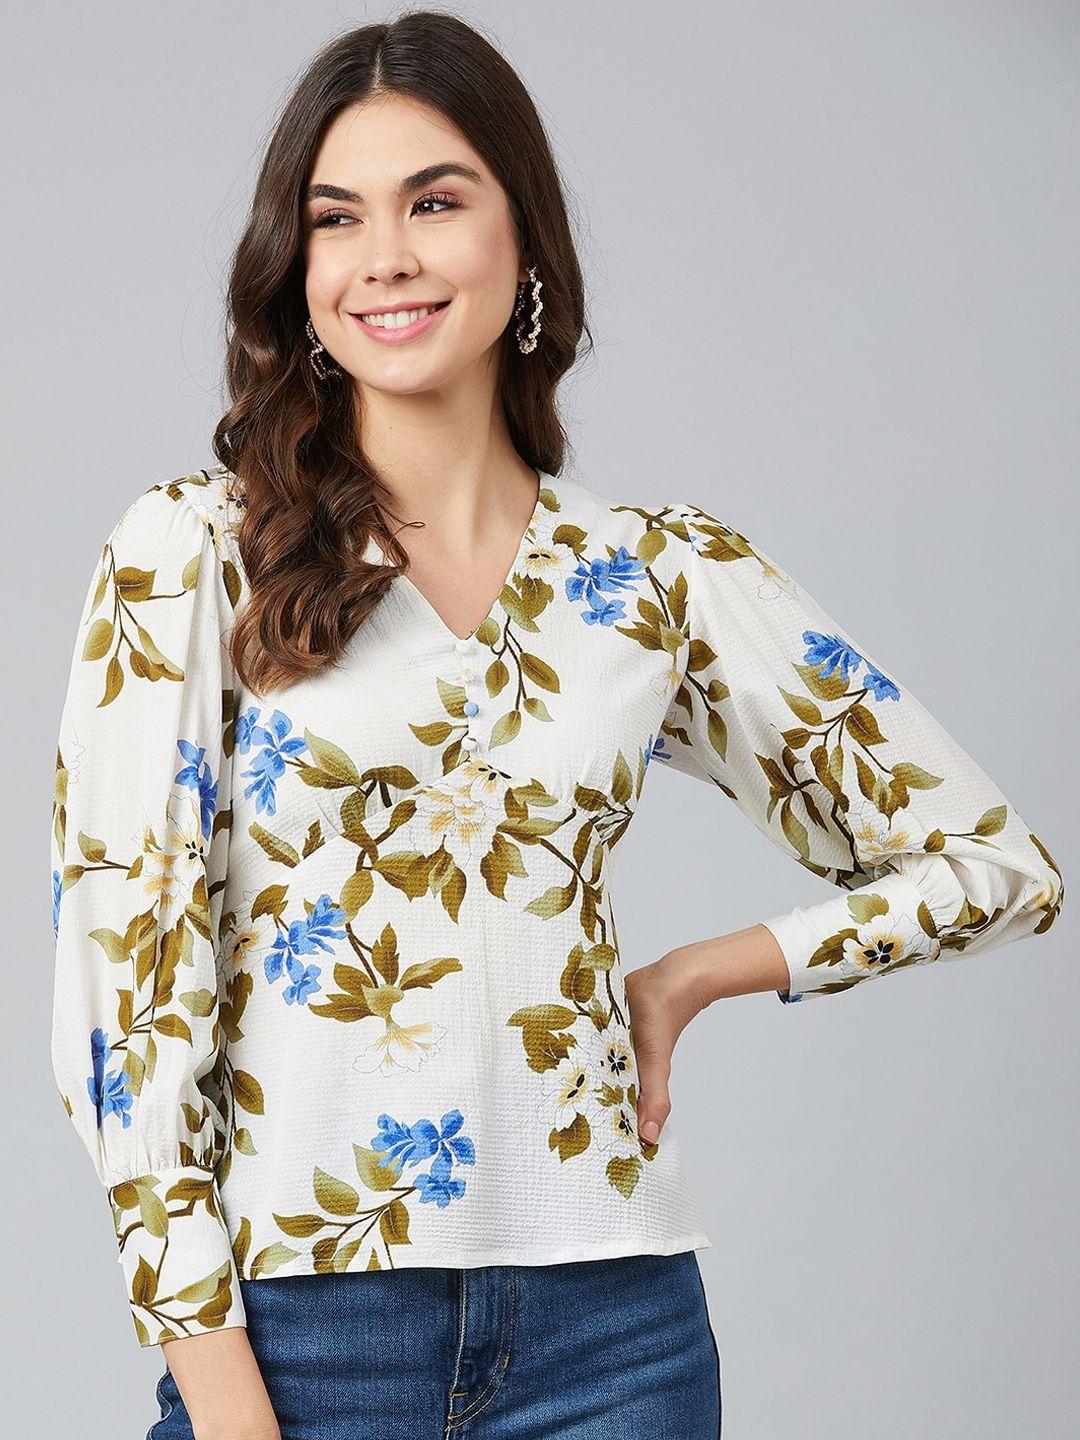 marie-claire-off-white-&-blue-floral-printed-crepe-top